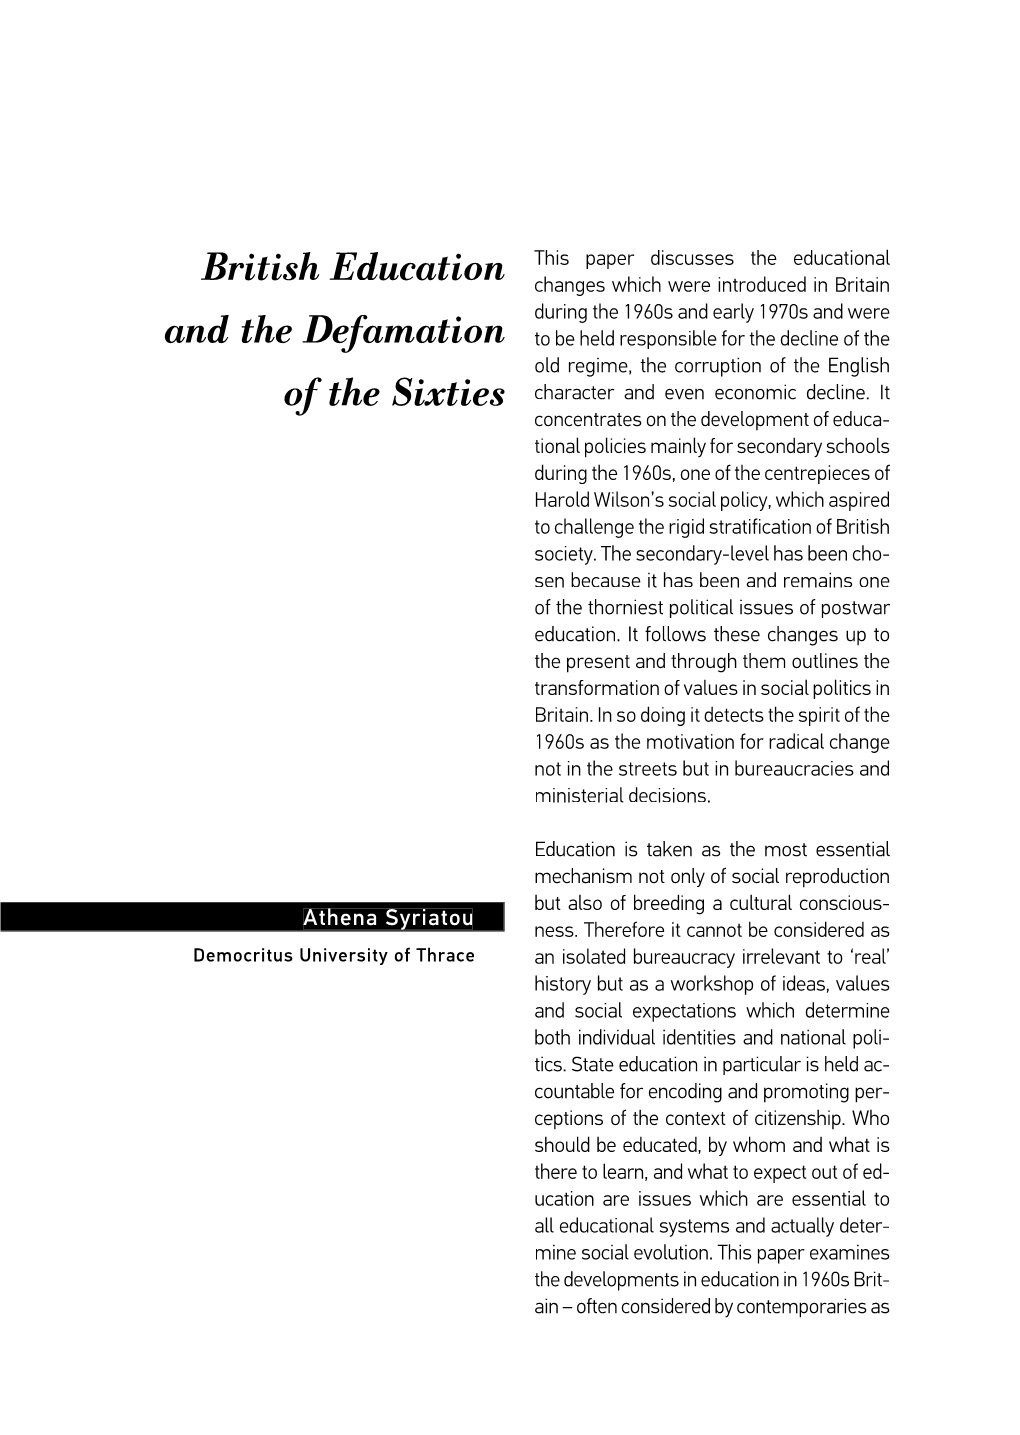 British Education and the Defamation of the Sixties